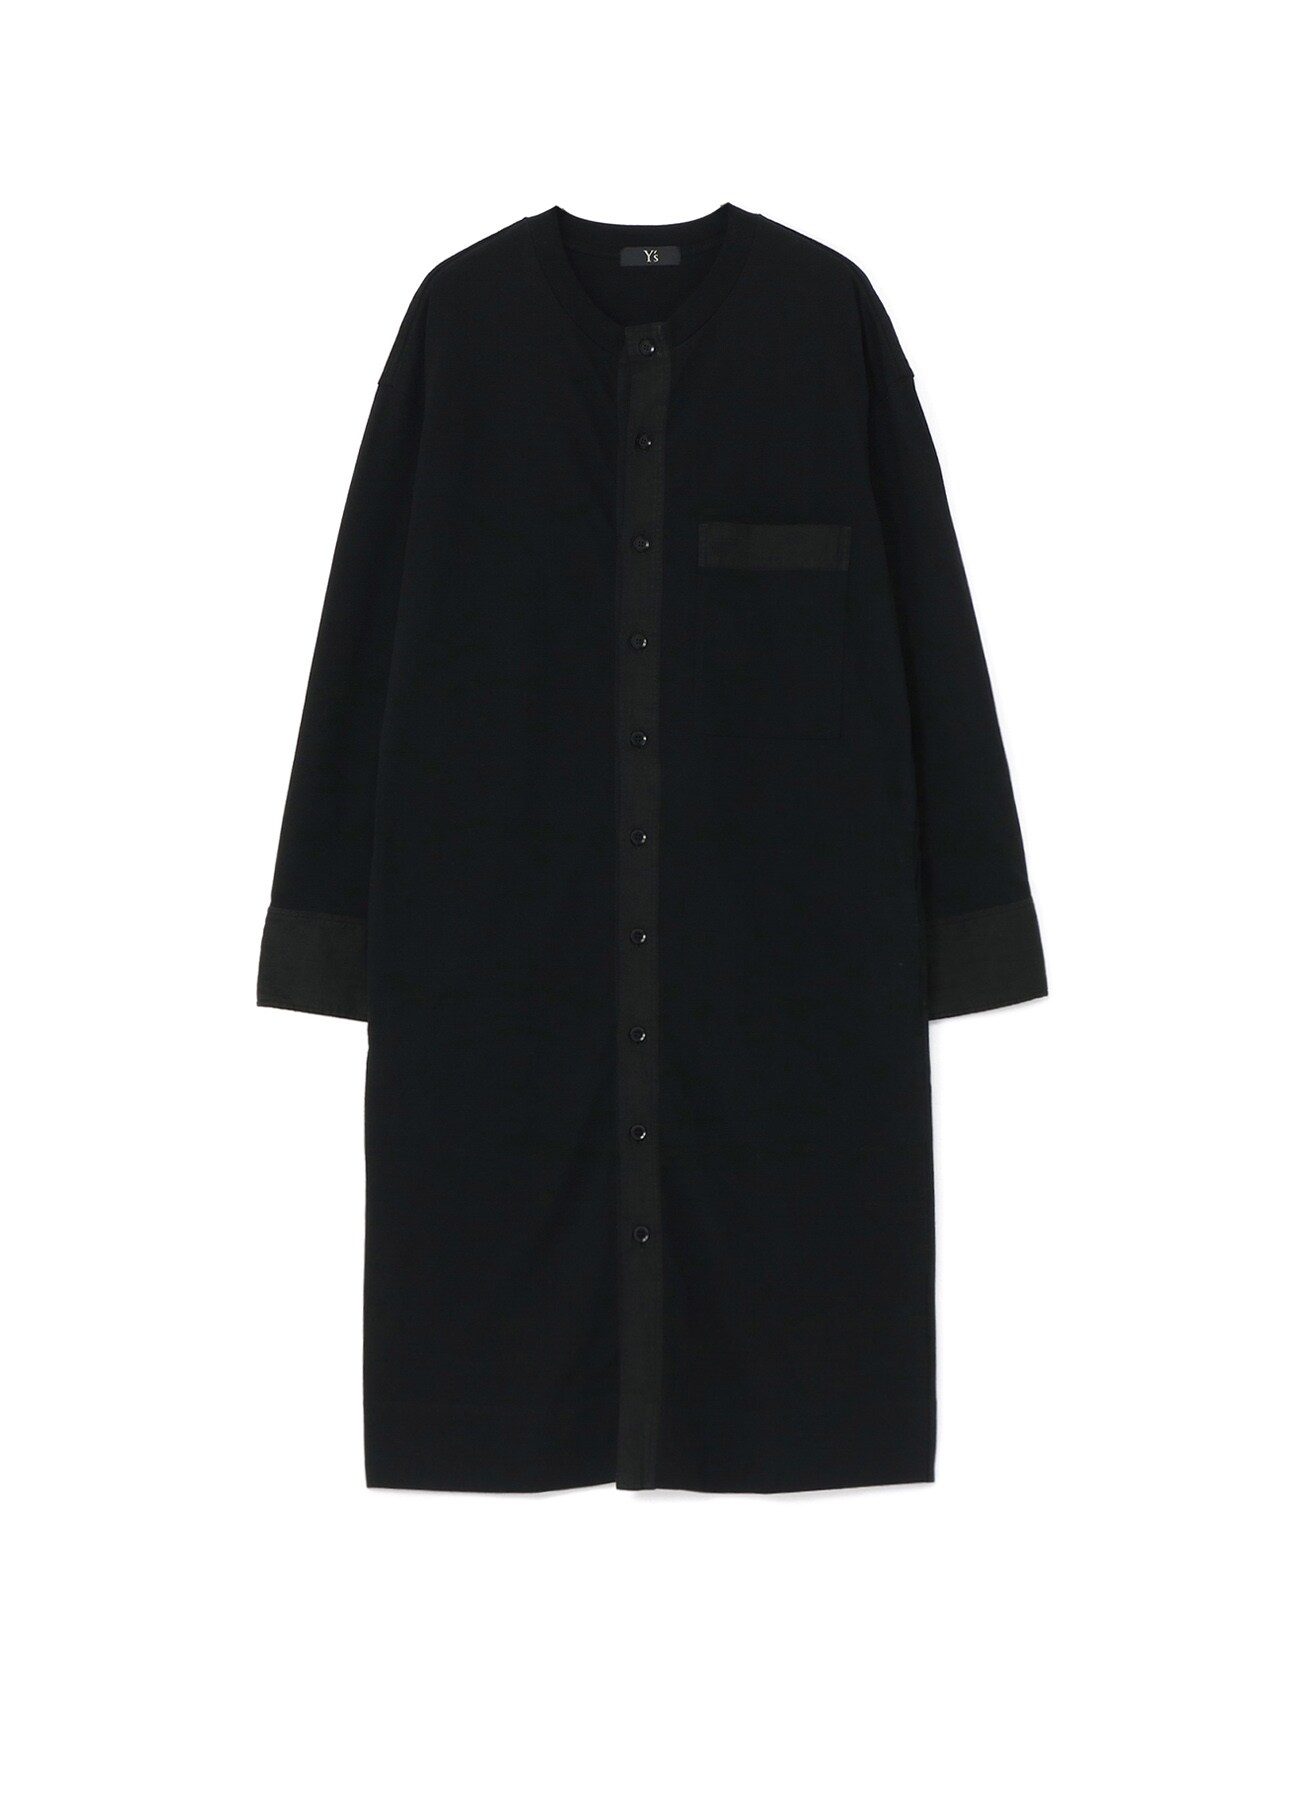 Y's｜ [Official] THE SHOP YOHJI YAMAMOTO (page 5/17)